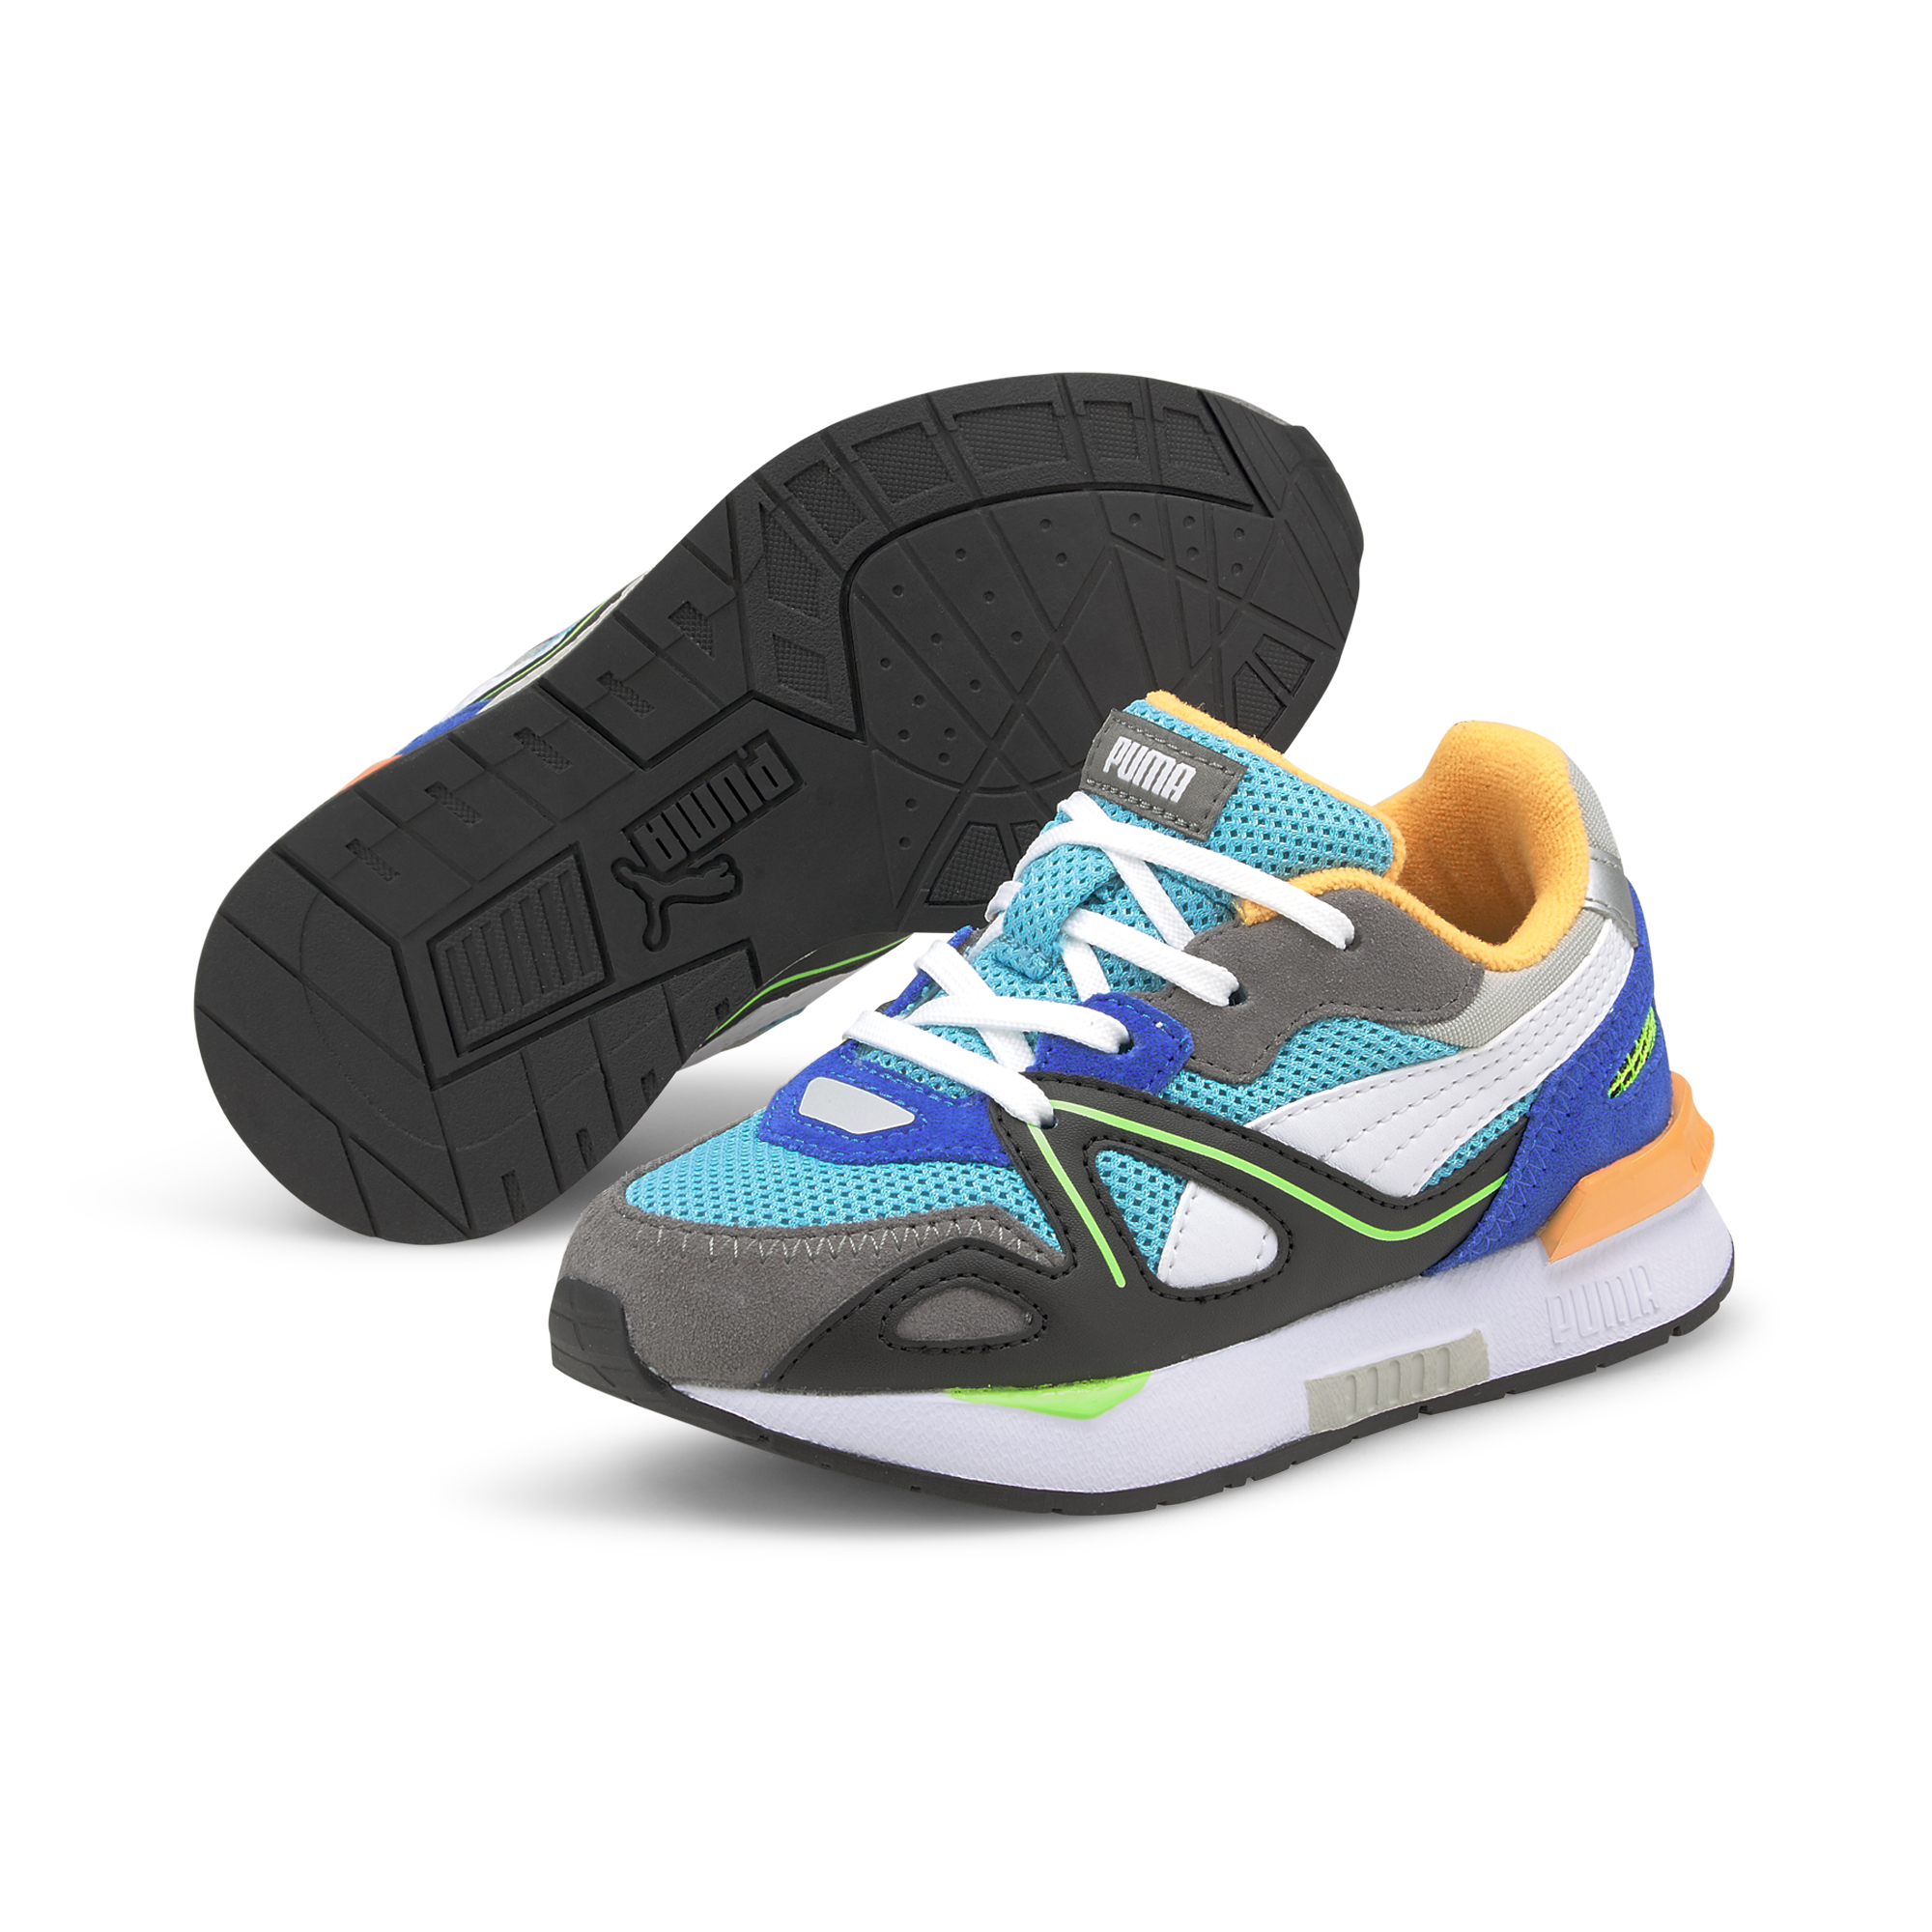  Mirage Mox Vision Ps Sneakers